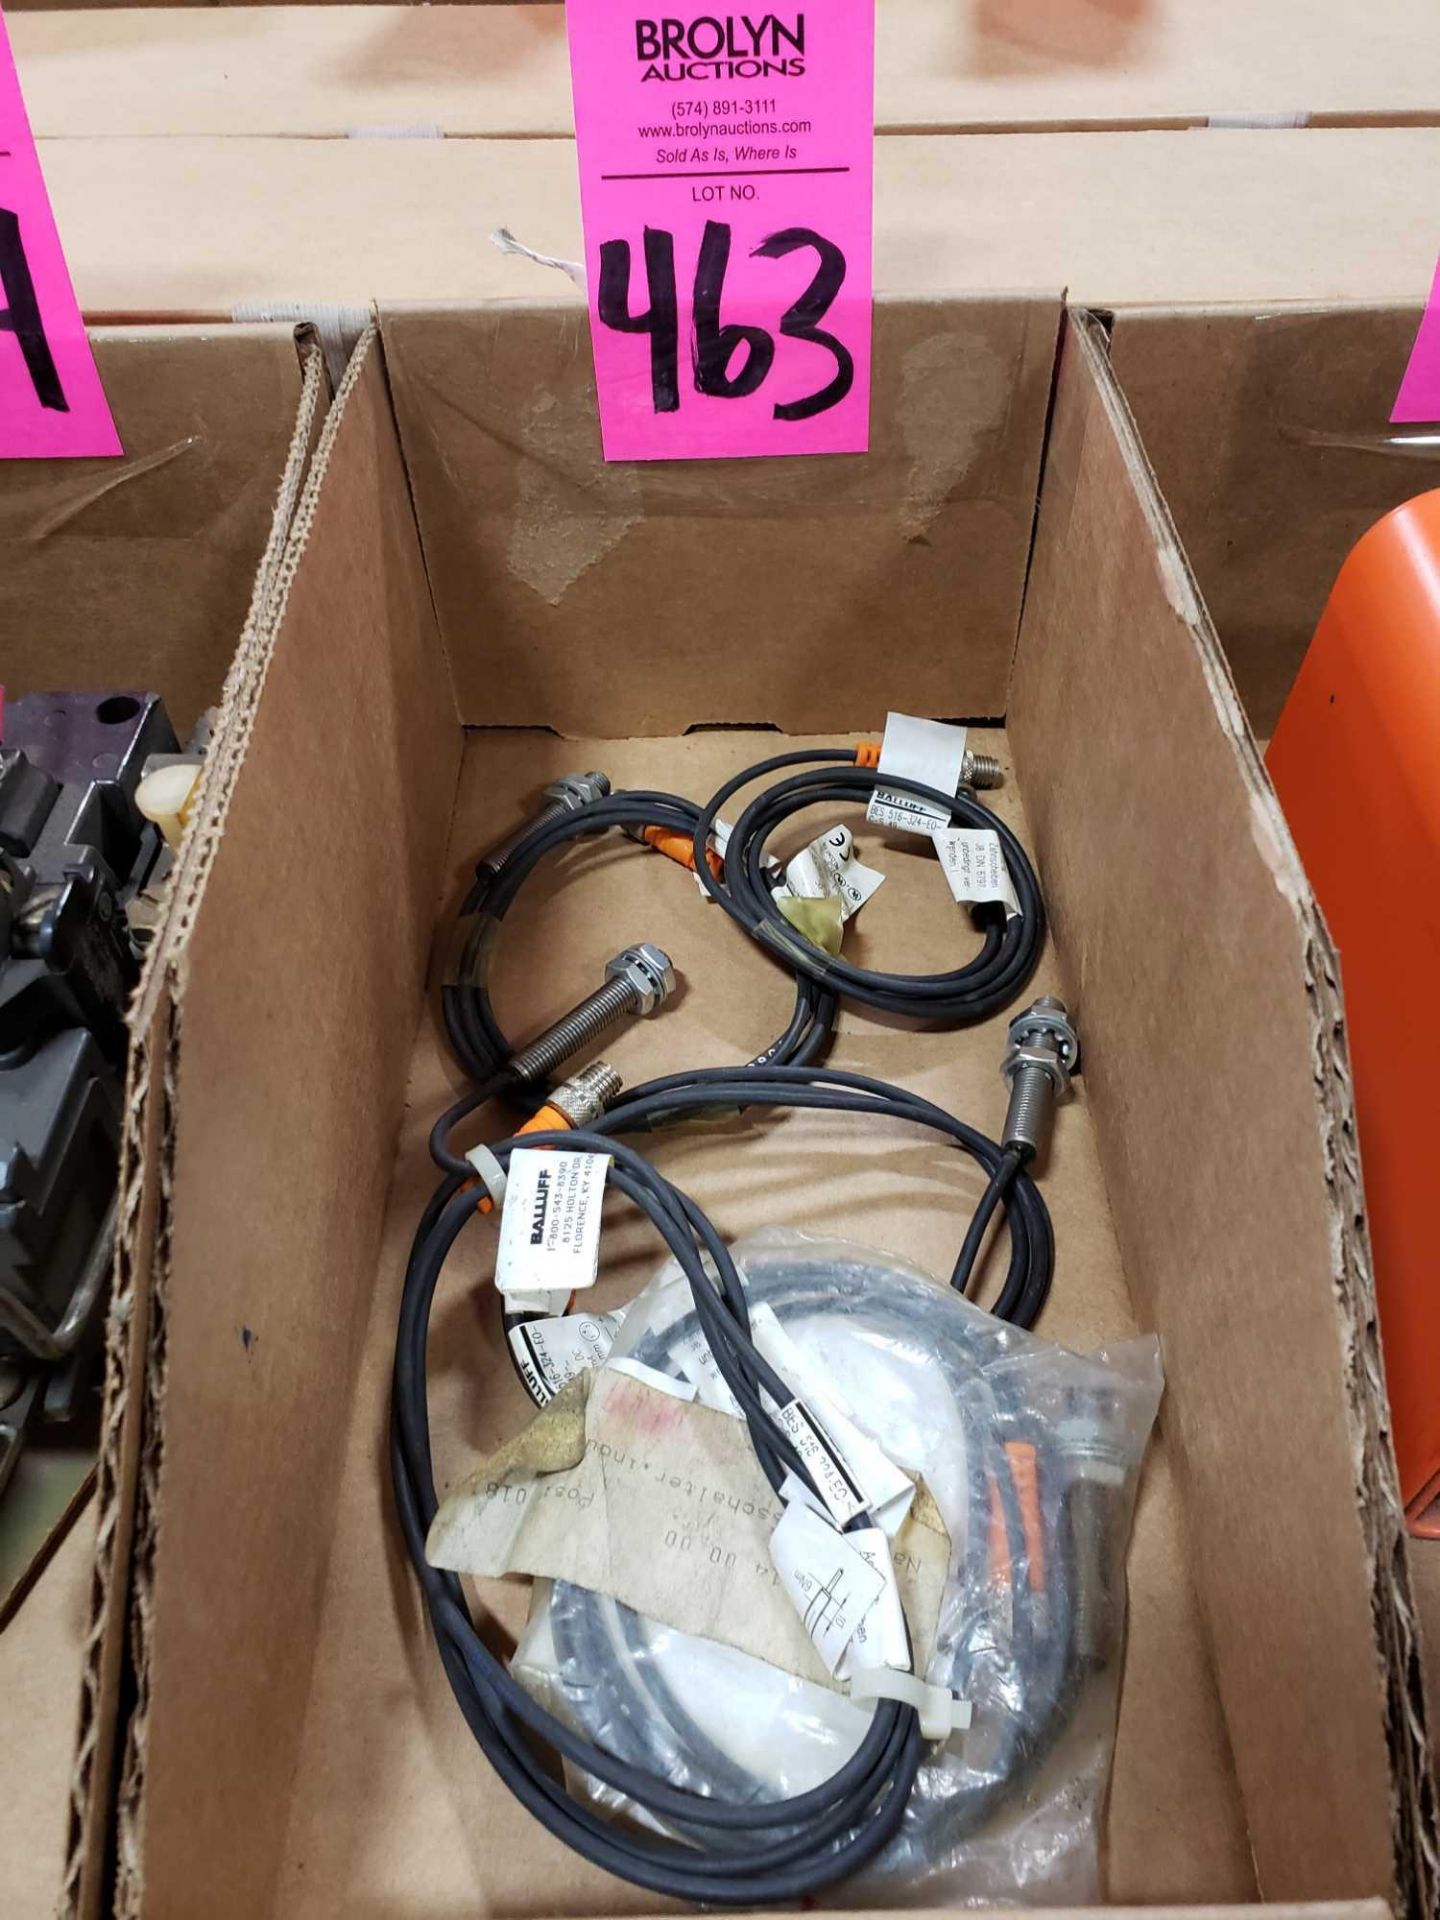 Qty 5 - Assorted Balluff photoelectric sensors. New as pictured.